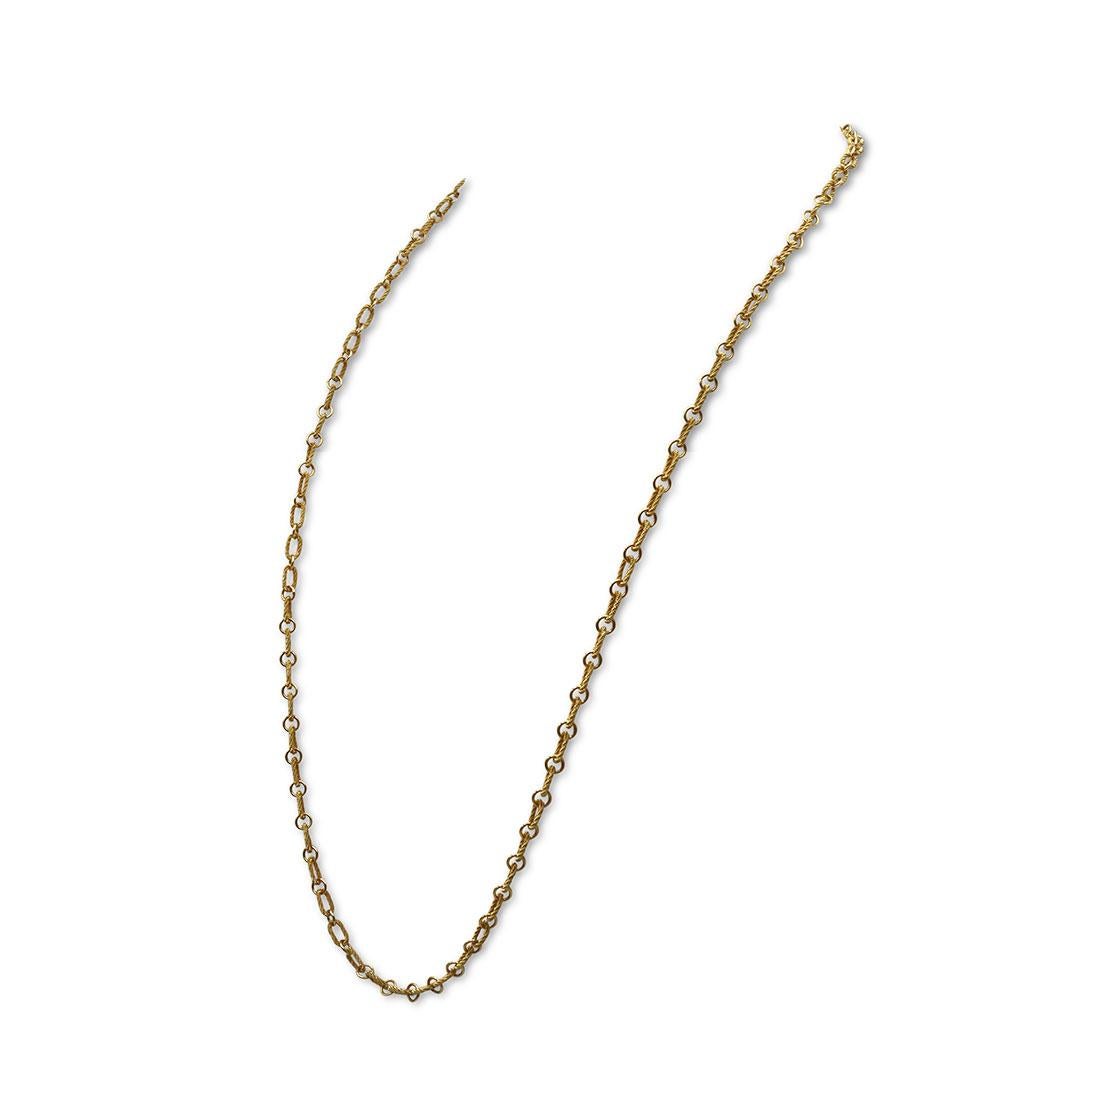 18 karat yellow gold necklace comprised of alternating oval-shaped rope textured links and high polished round links. The delicate chain mesaurse 30 1/2 inches in length with a box clasp. Stamped 18K, Italy. Necklace is presented without box and